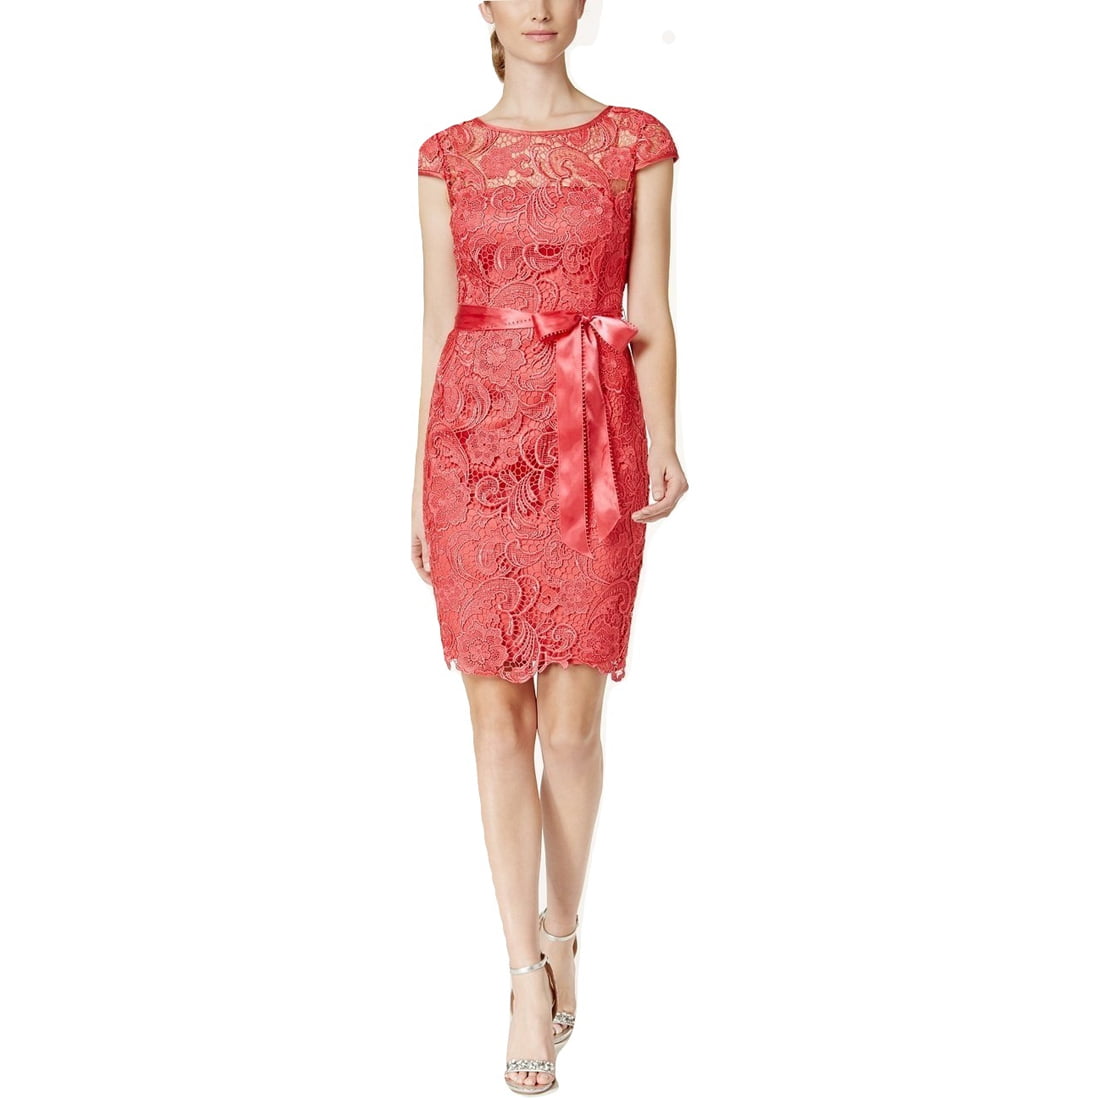 Adrianna Papell Women's Lace Cap-Sleeve ...